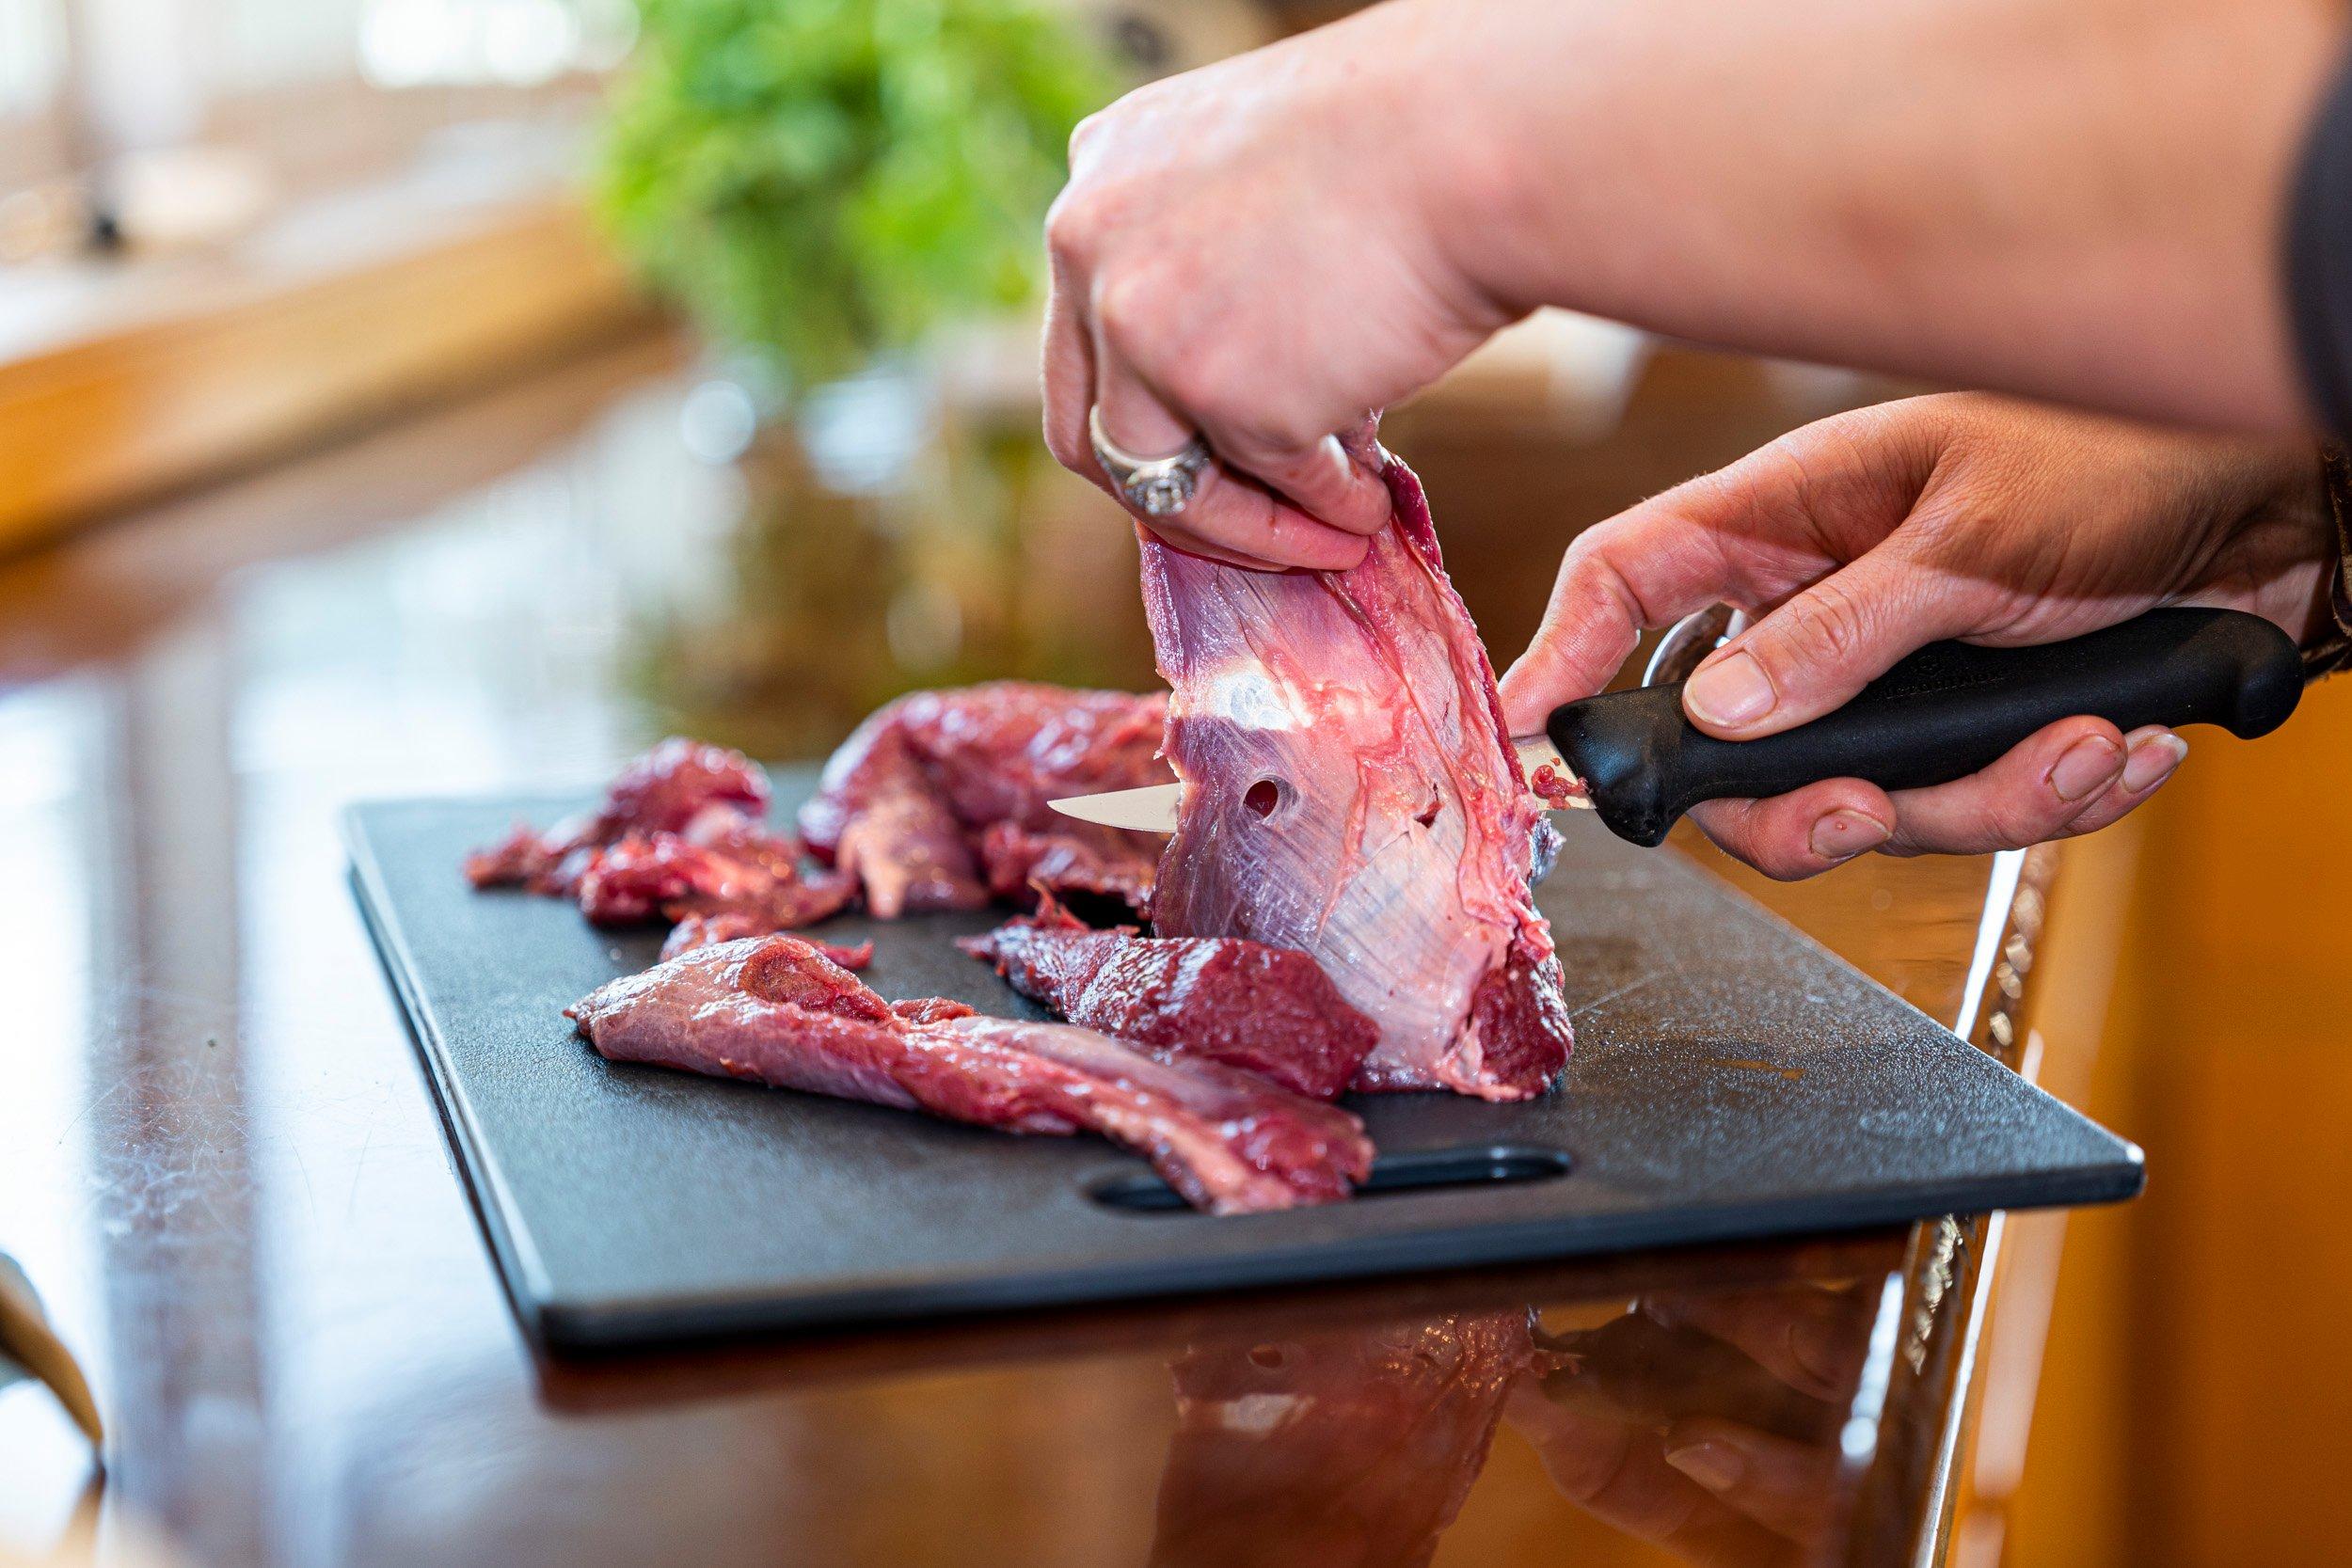 Trim away fat and connective tissue from bear meat before slicing into thin strips. Image by GritMedia